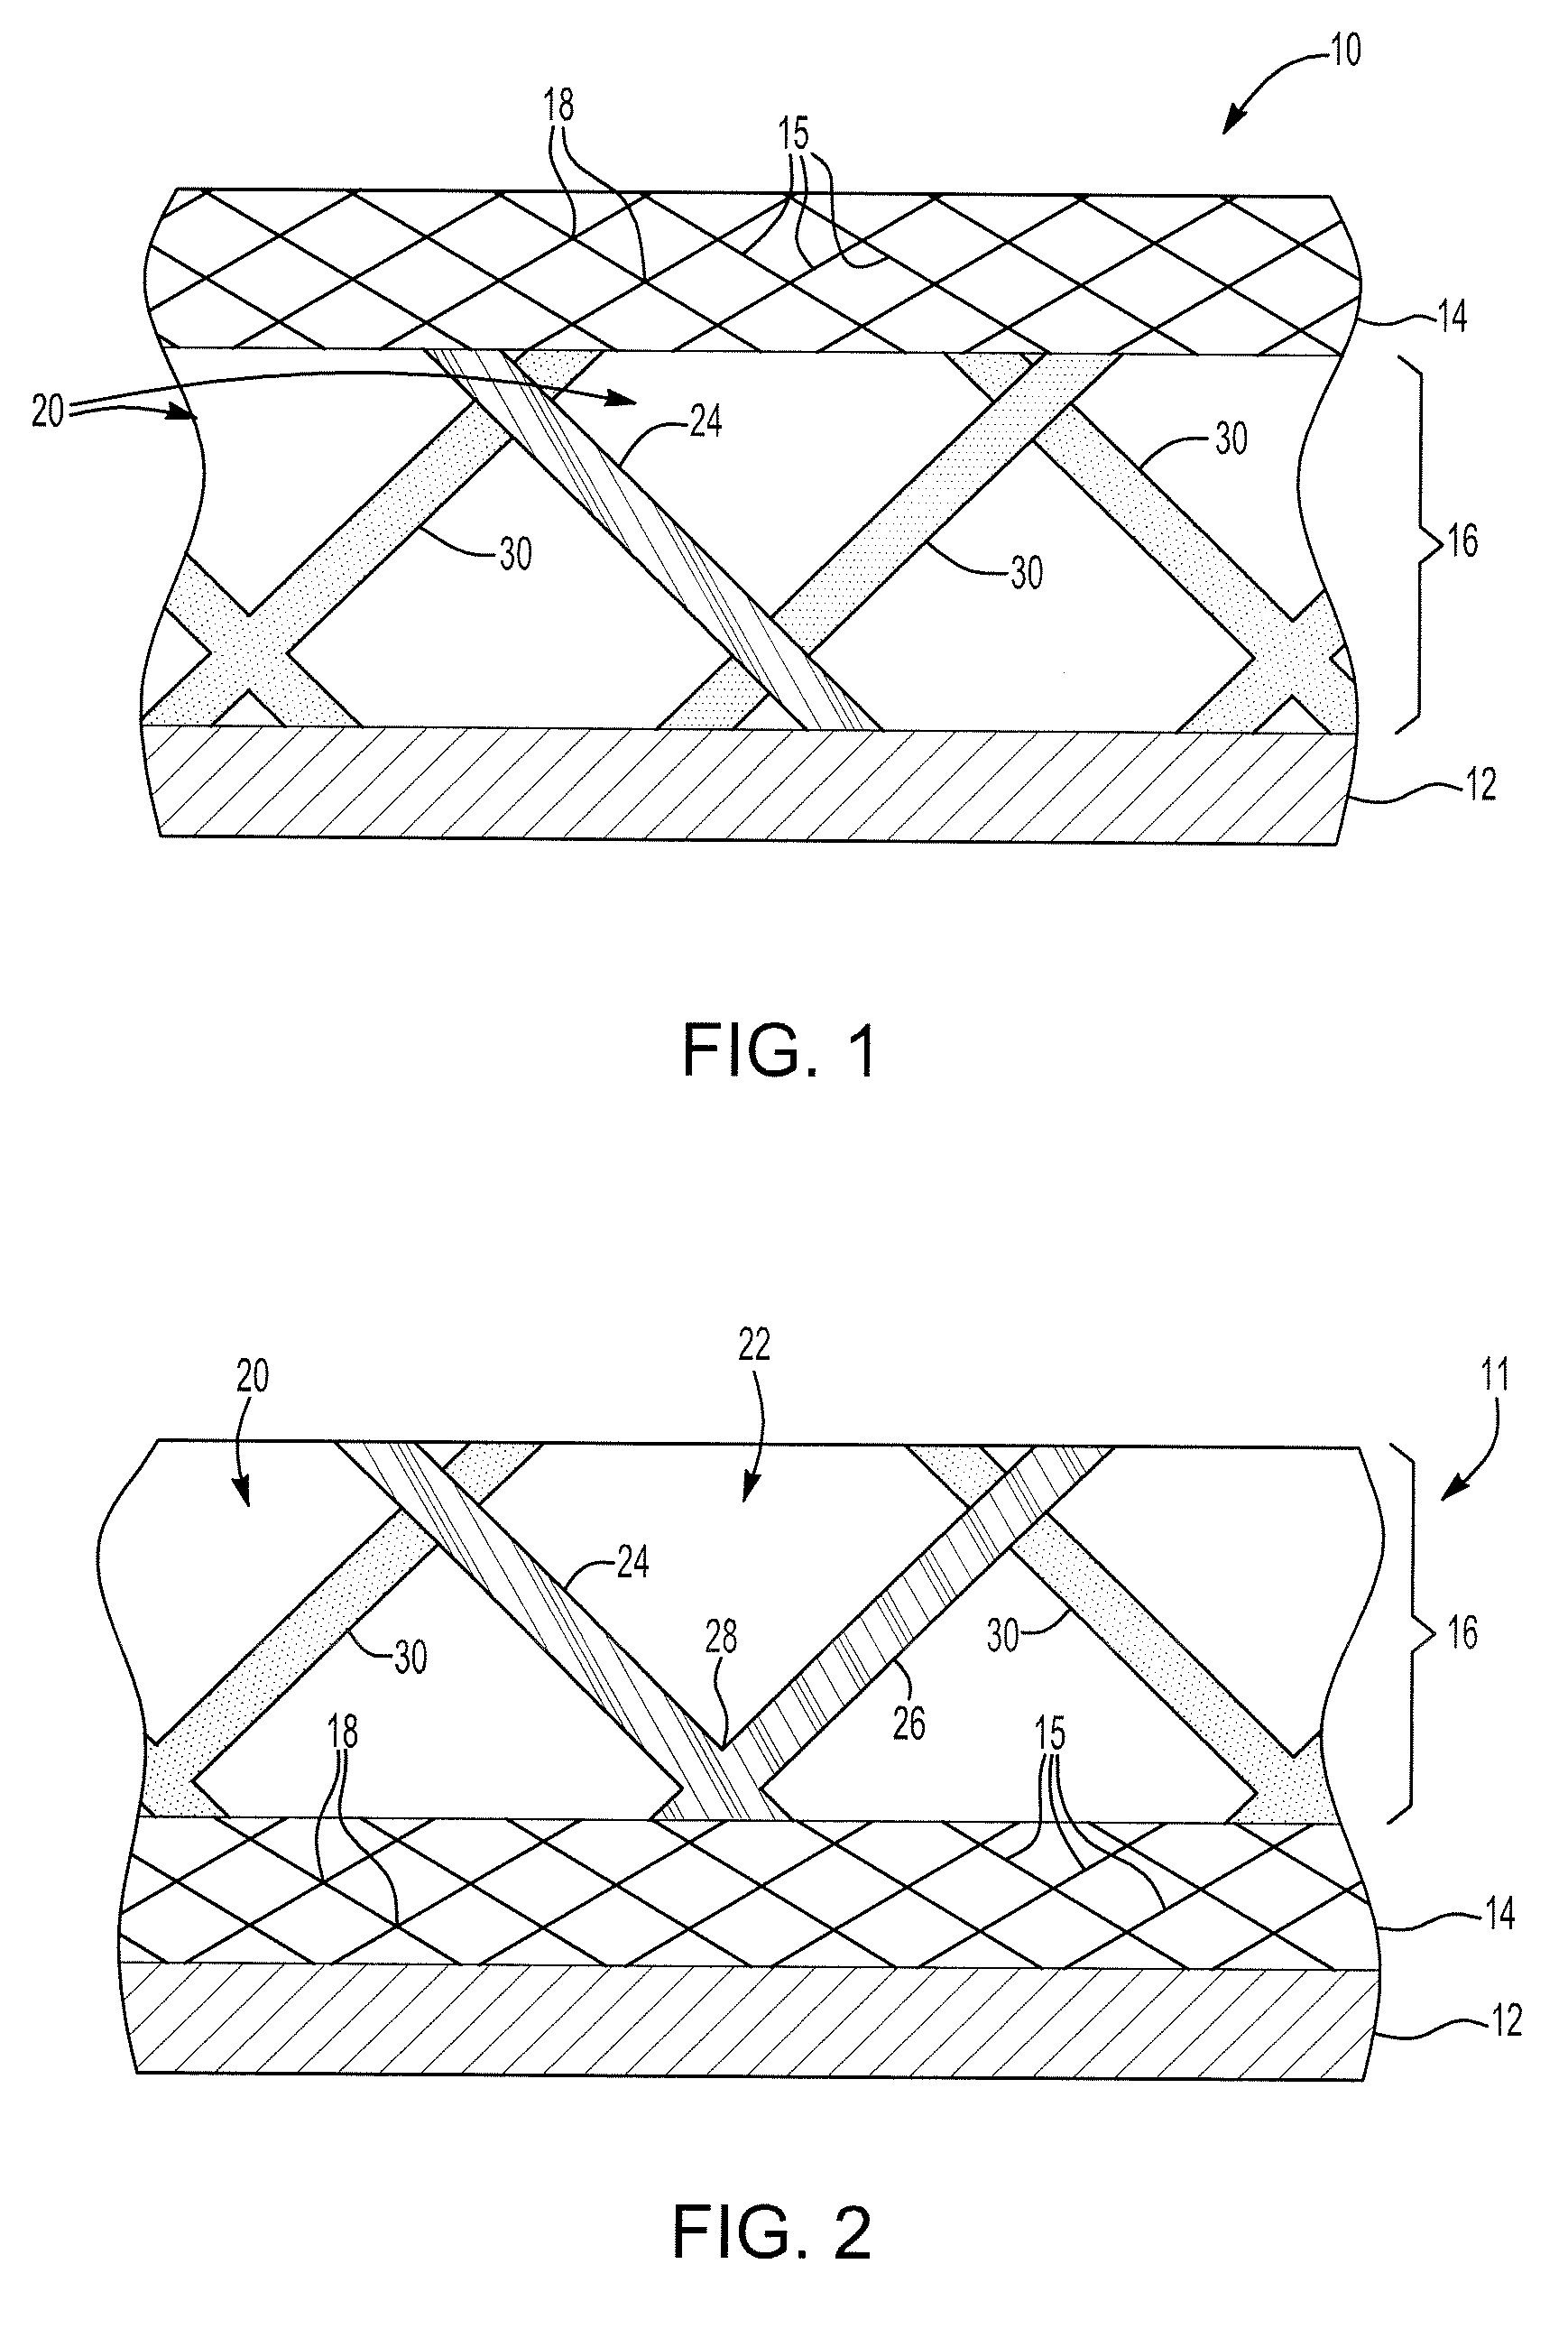 Fuel cell fabrication using photopolymer based processes